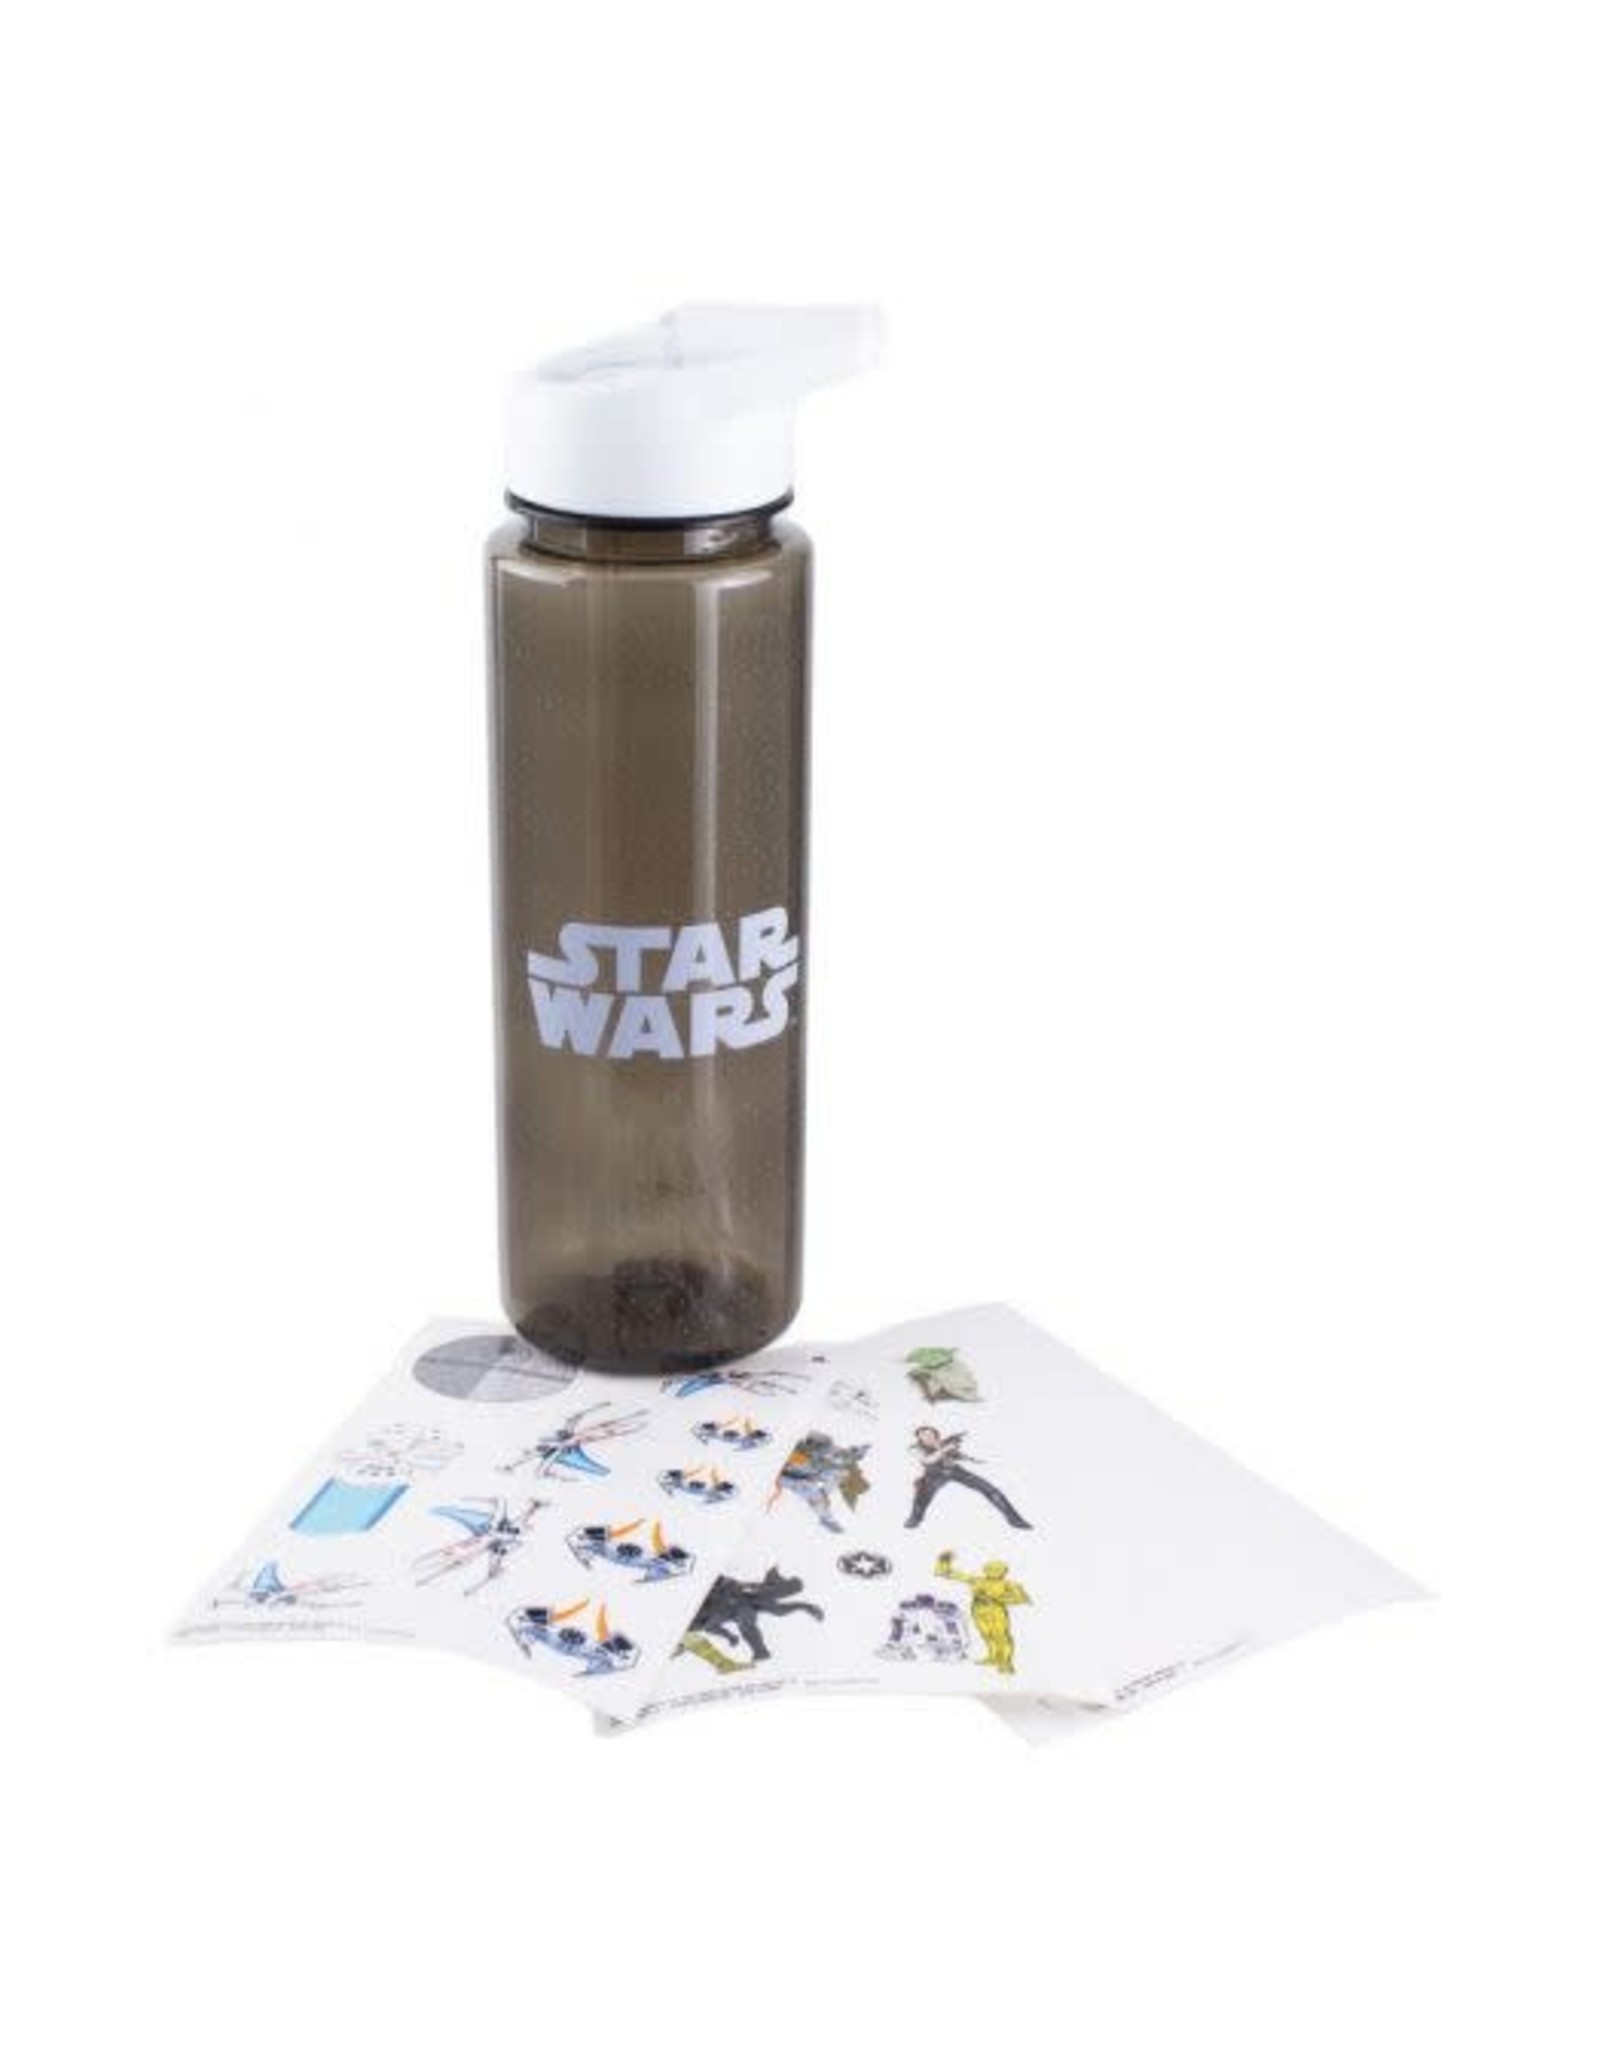 Paladone Star Wars Water Bottle with Stickers